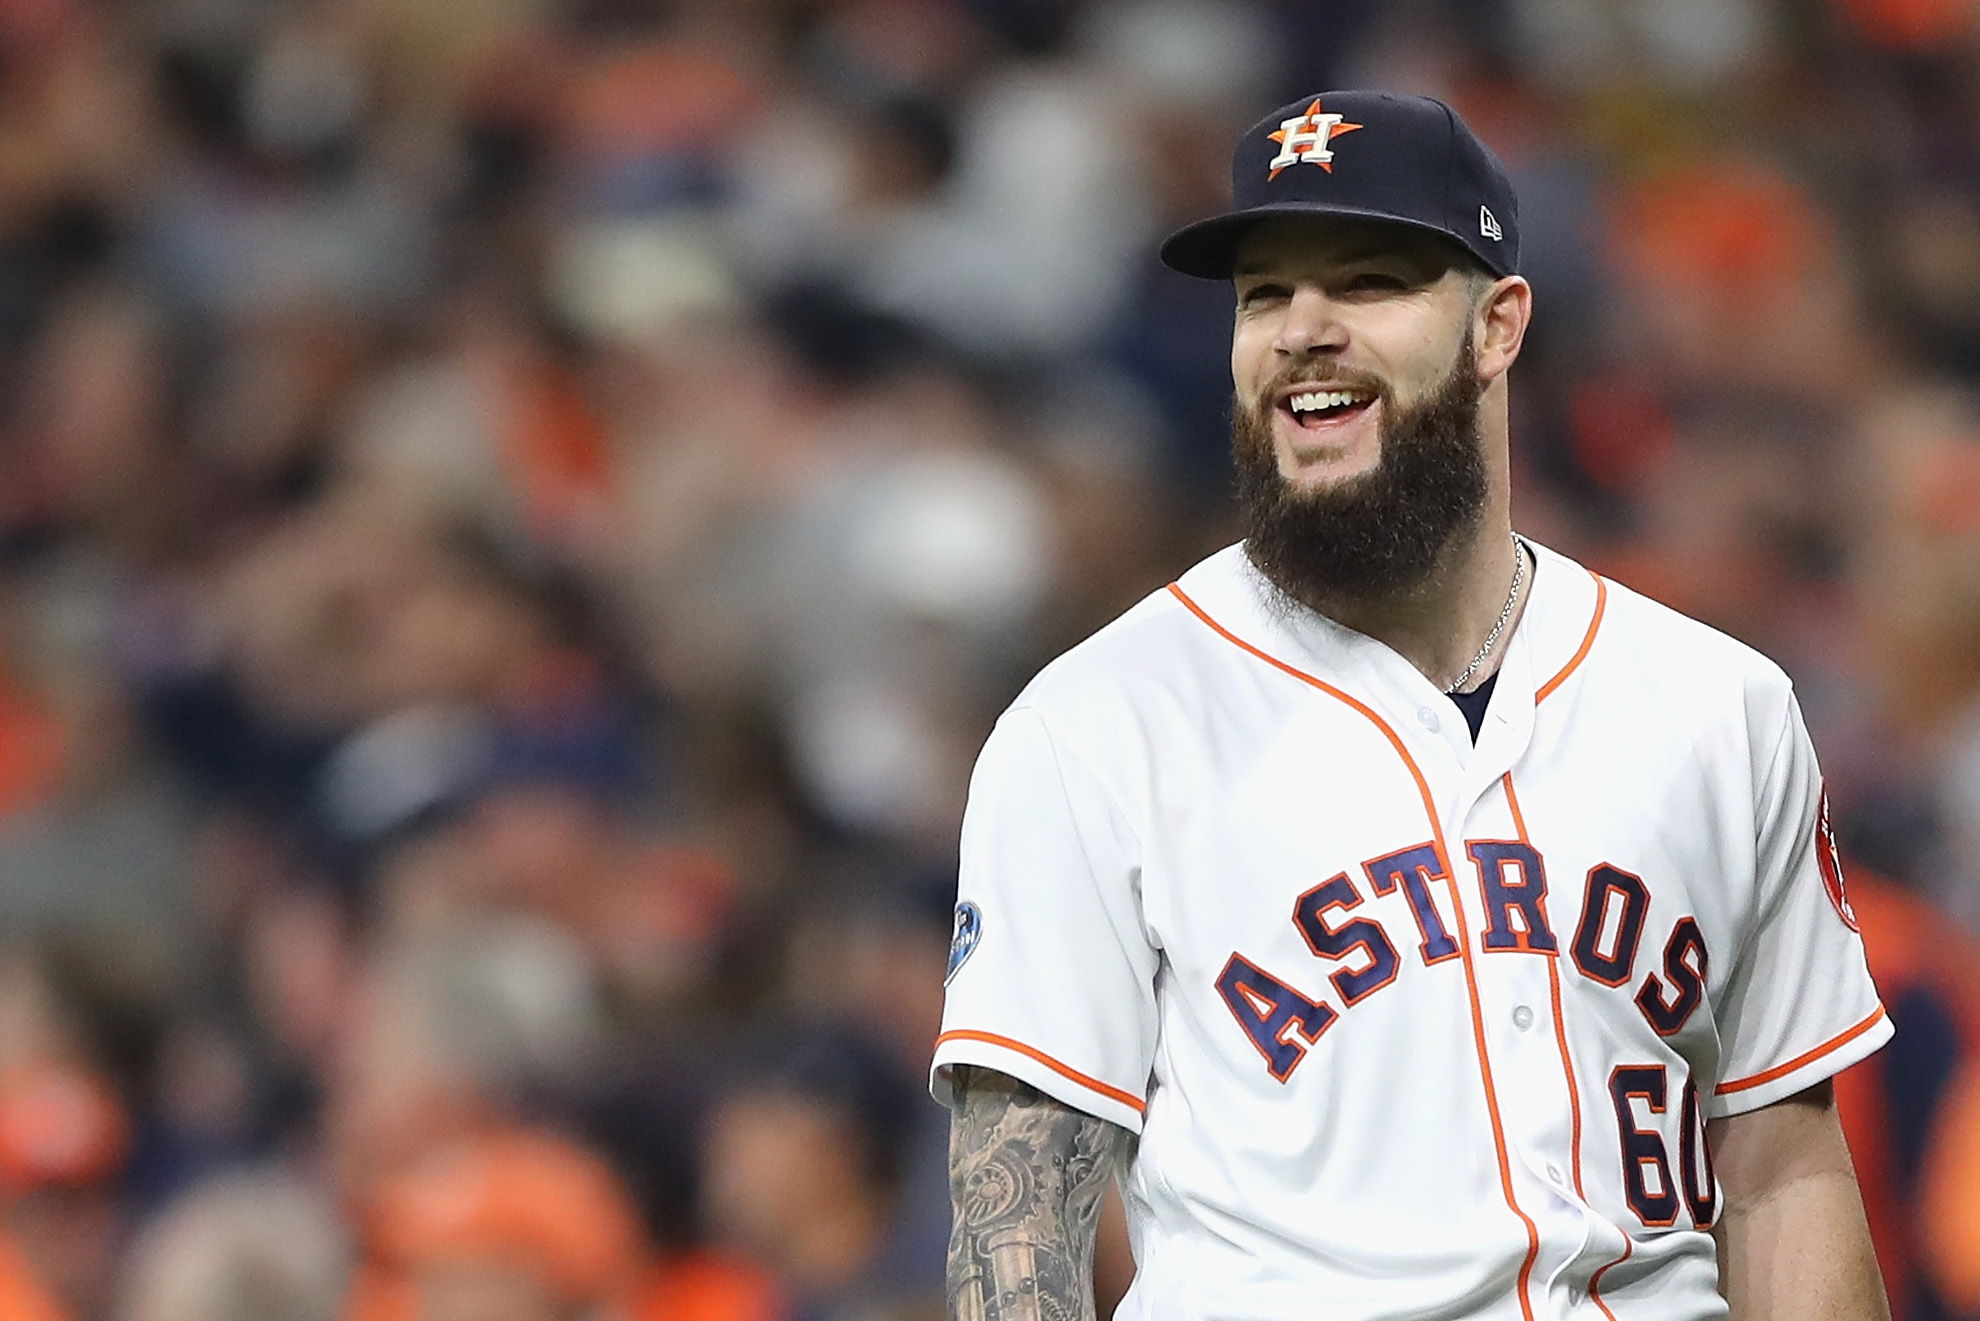 Dallas Keuchel Is the Prime Cy Young Winner Being Ignored Entering